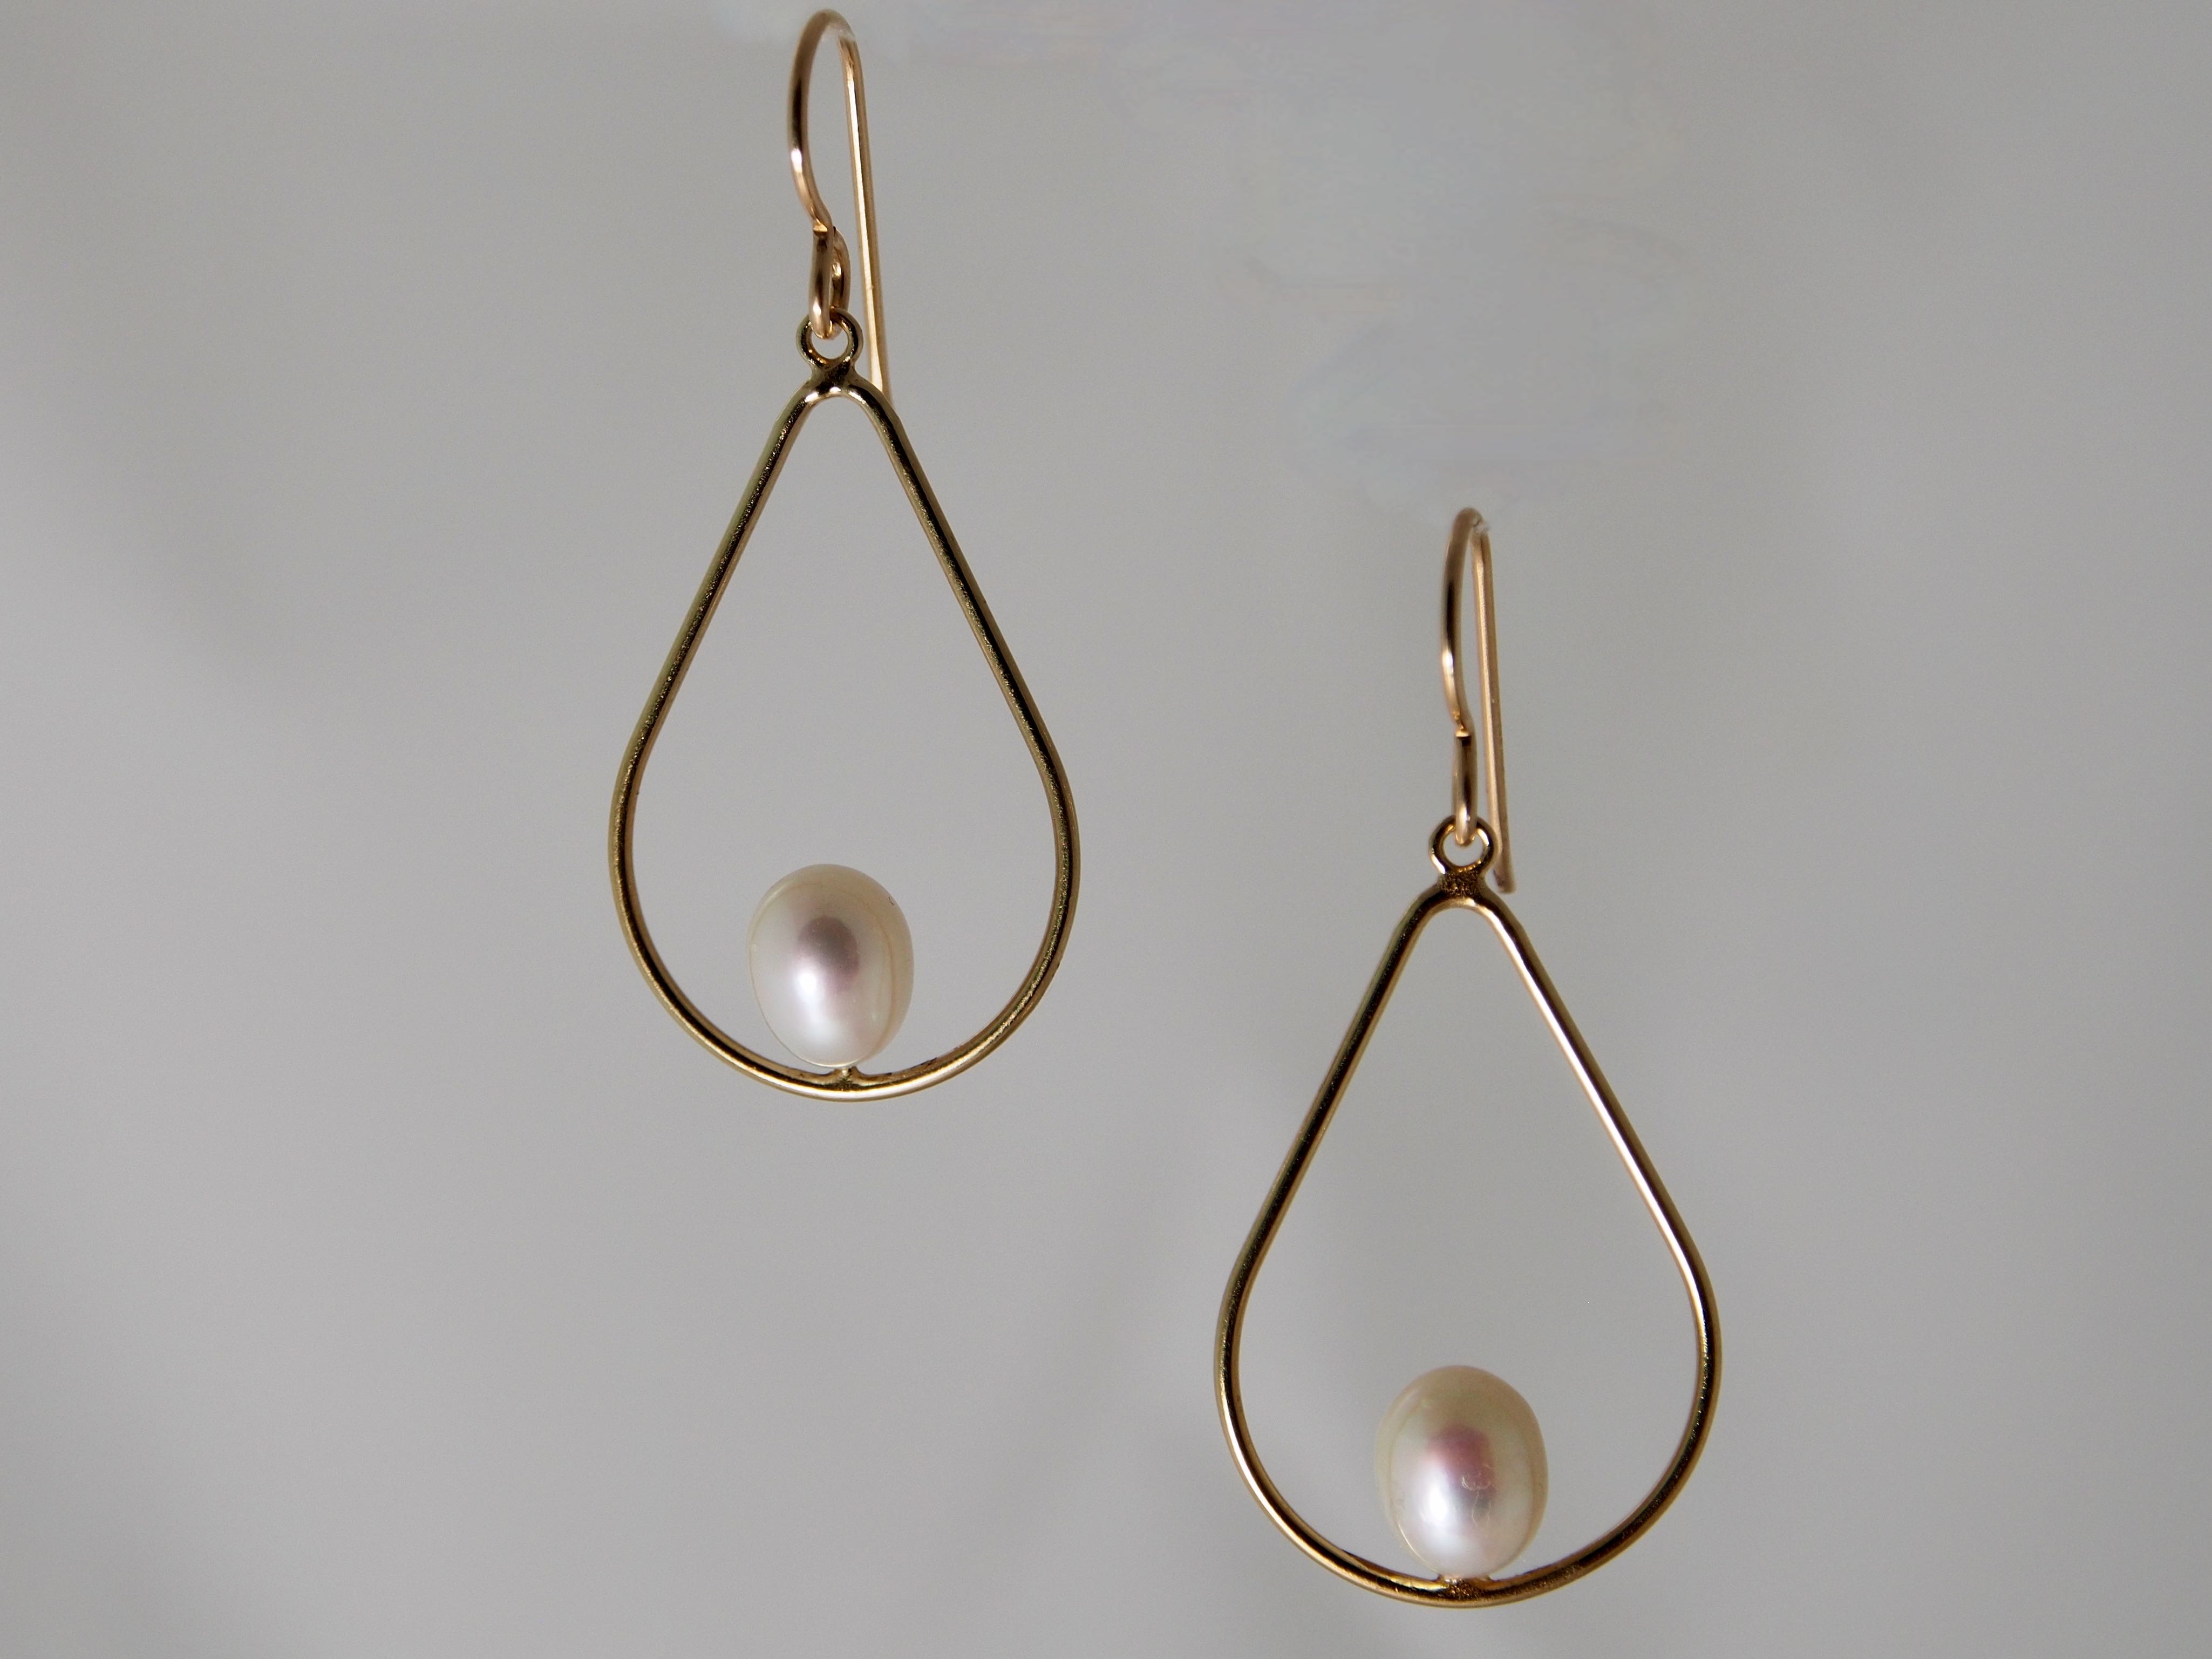 White Pearl Drop Earrings - 14KT Gold Plate/White Pearl